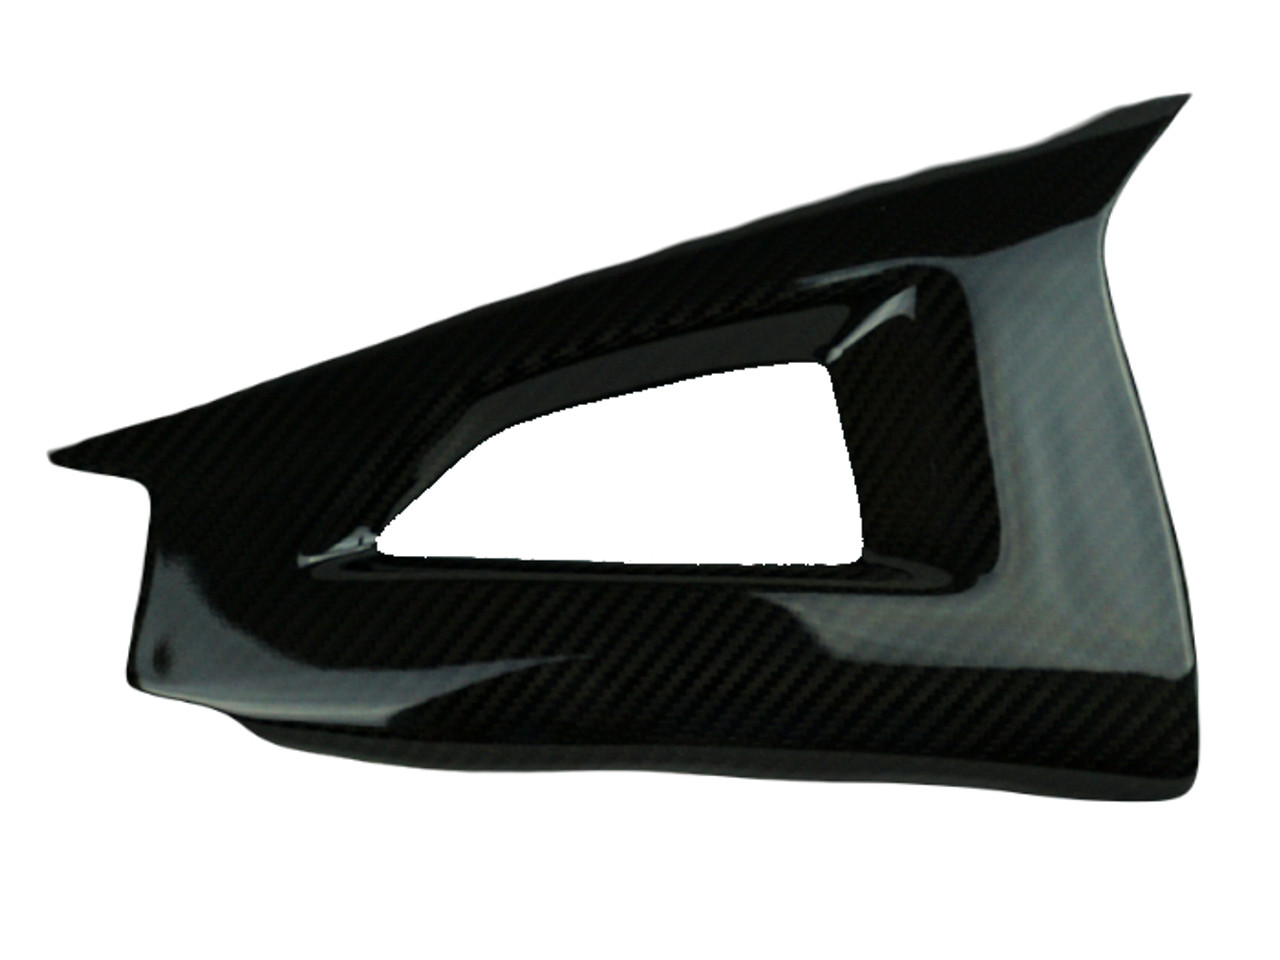 Swingarm Covers in Glossy Twill Weave Carbon Fiber for Kawasaki ZX10R 2011-2015